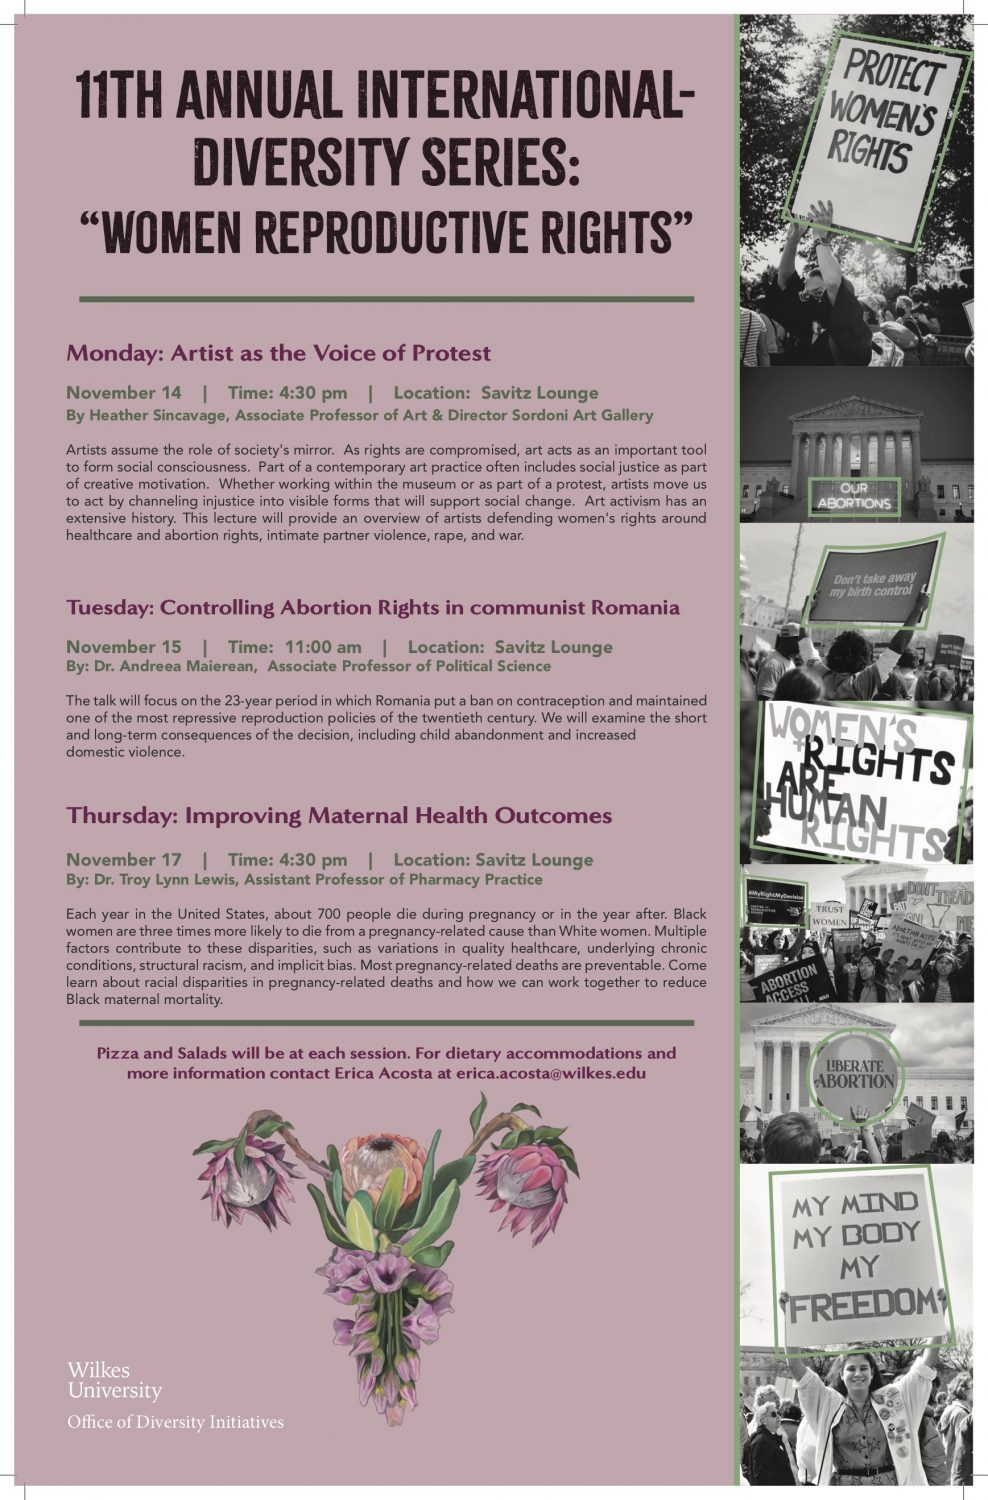 Diversity series focusing on women's reproductive rights

Nov. 14 at 4:30 p.m.  - Artist as the voice of protest

Nov. 15 at 11 a.m. - Controlling abortion rights in communist Romania

Nov. 17 at 4:30 p.m. - Improving maternal health outcomes

All sessions will be in the Savitz Lounge.

Pizza/salads available.

Questions? Contact erica.acosta@wilkes.edu.